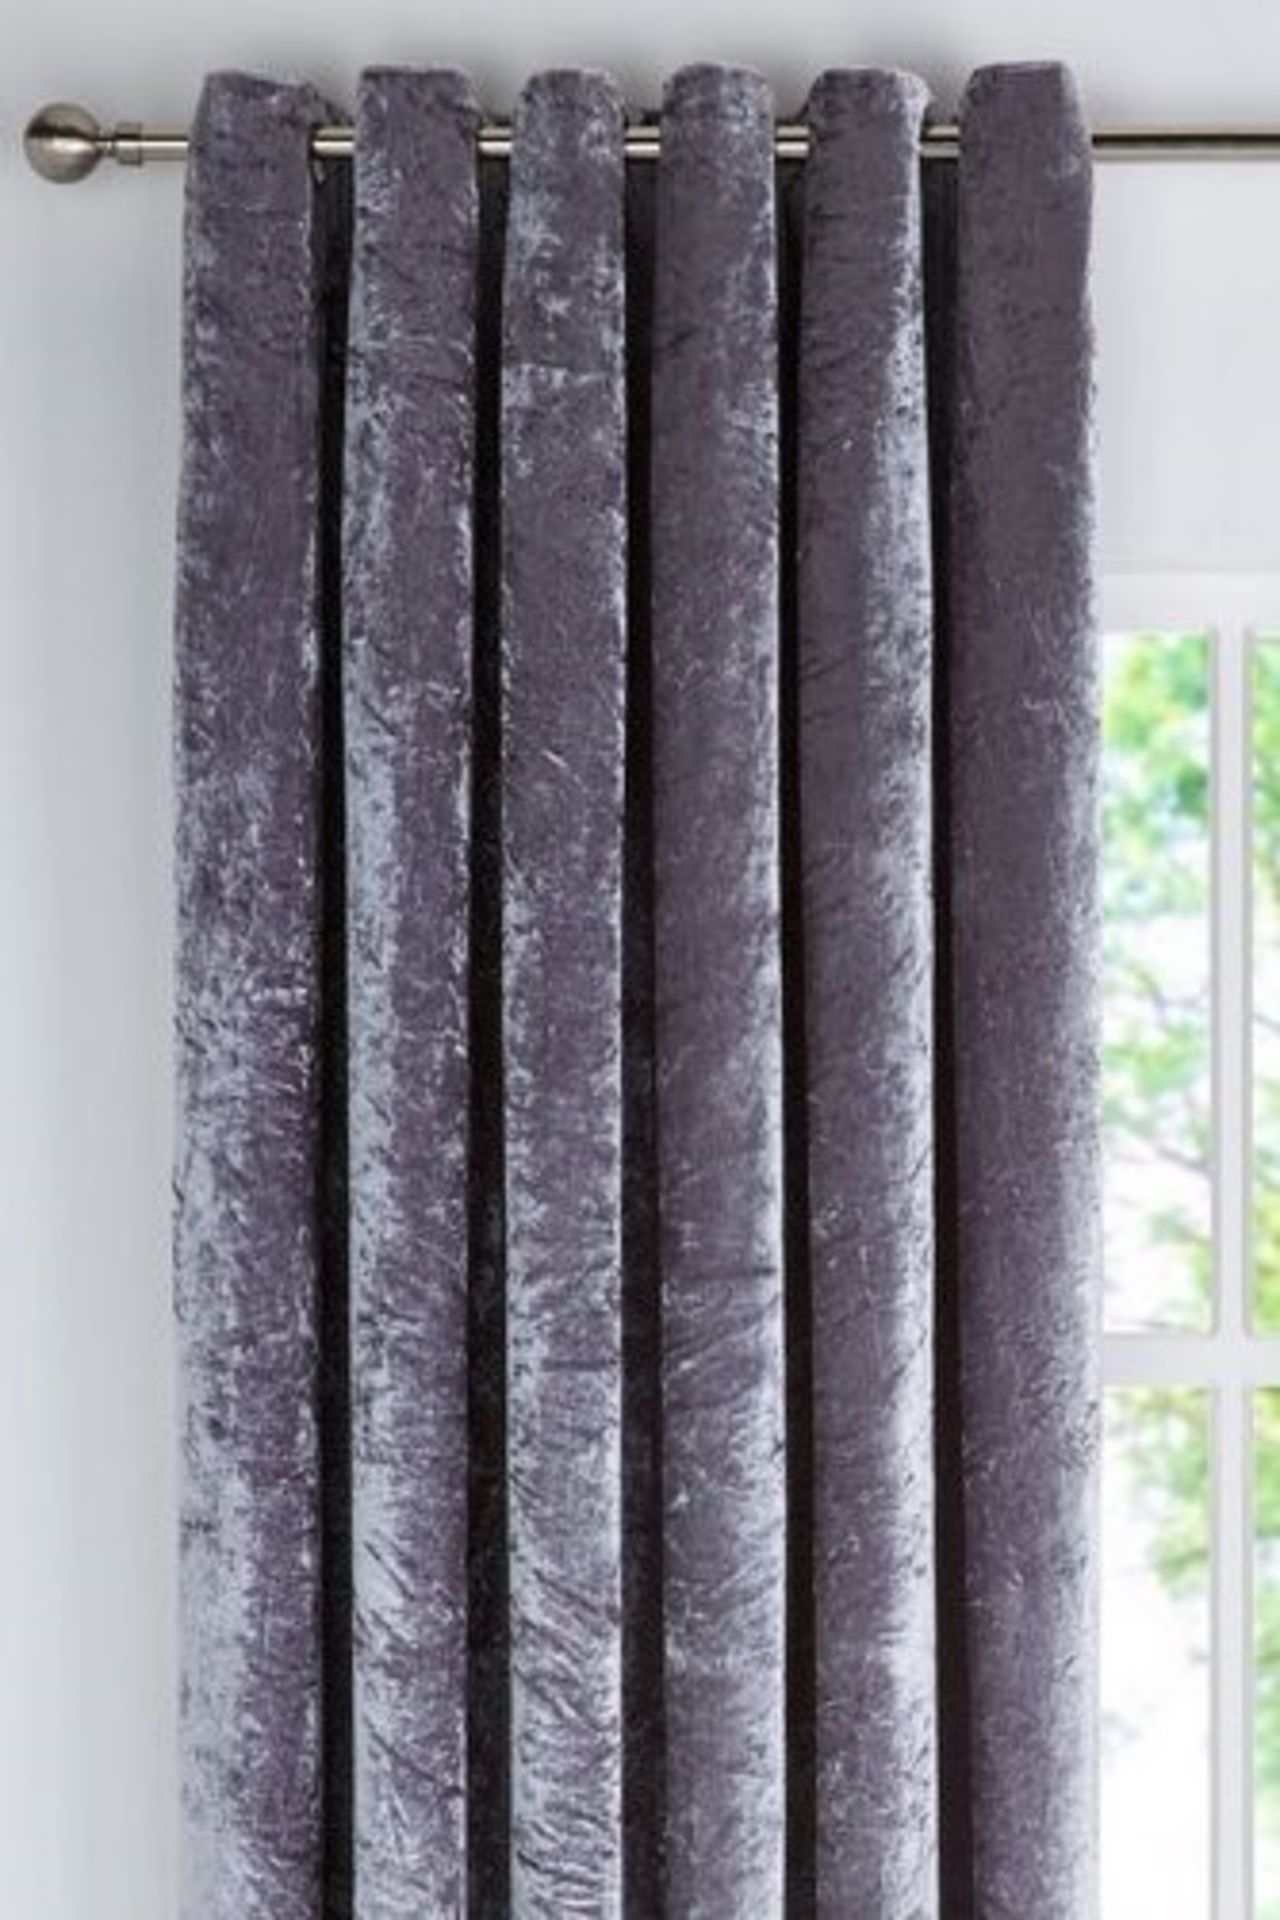 1 PACKAGED CRUSHED VELVET FULLY LINED EYELET CURTAINS IN SILVER / APPROX 46" X 54" (VIEWING HIGHLY